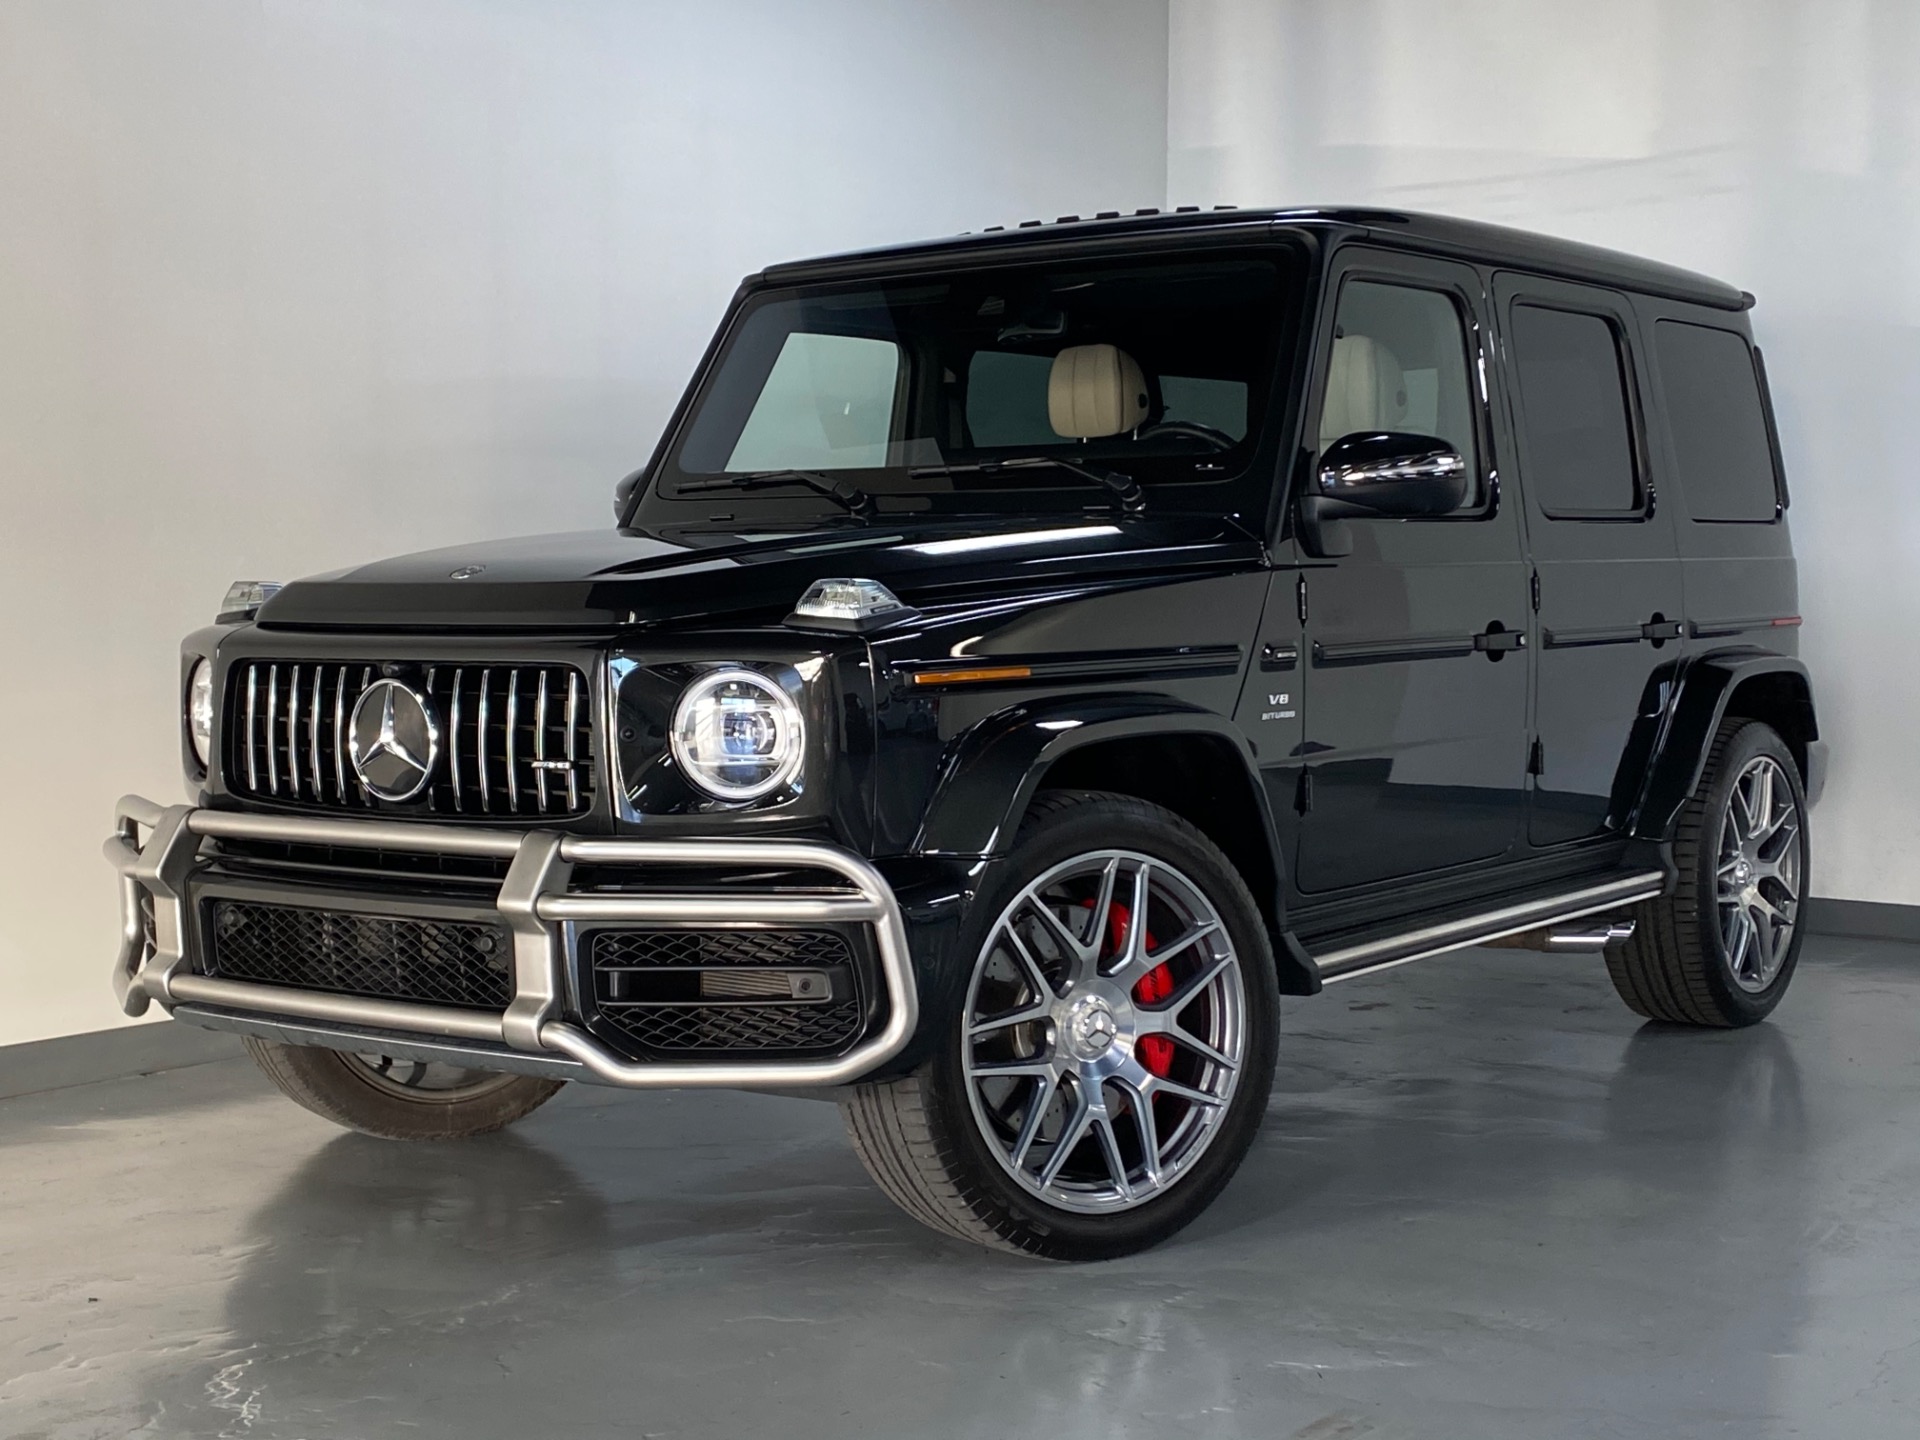 Used 19 Designo Platinum Black Metallic Mercedes Benz G Class G63 Amg 4matic Amg G 63 For Sale Sold Prime Motorz Stock 3067